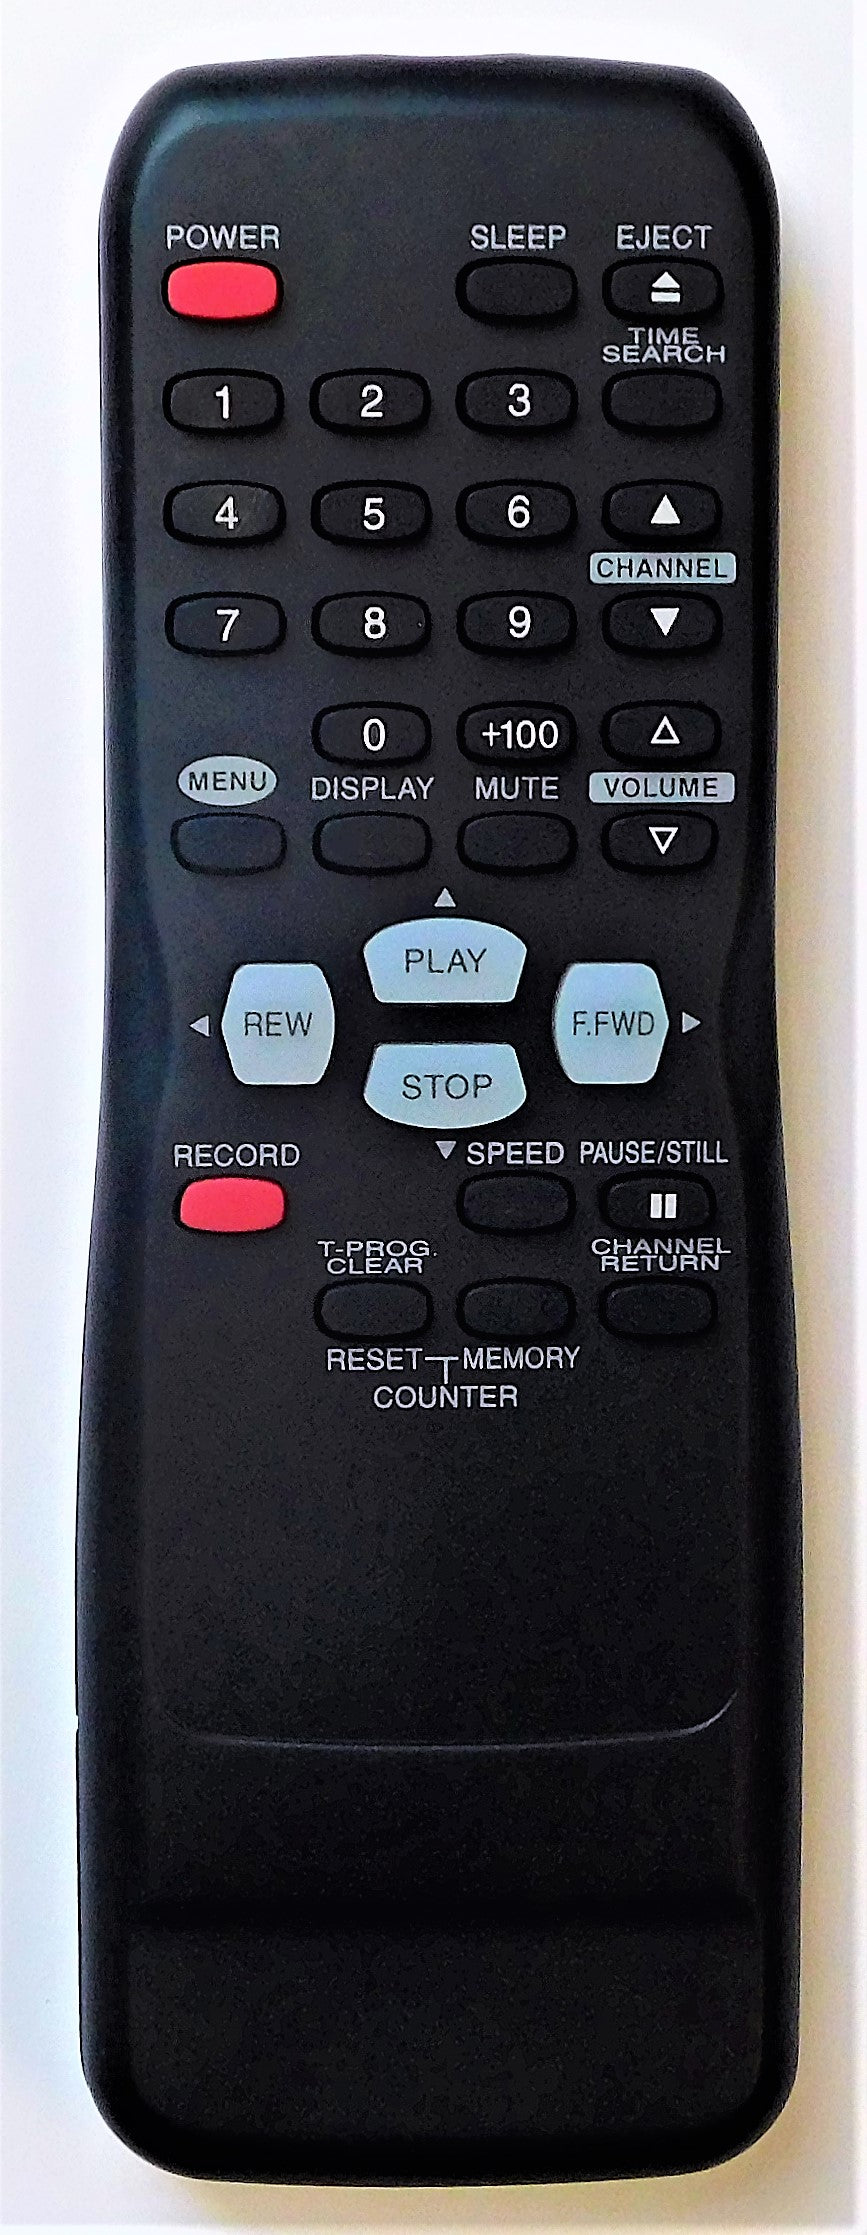 OEM replacement remote control for Sylvania CRT TV & VCR COMBOs N0244UD